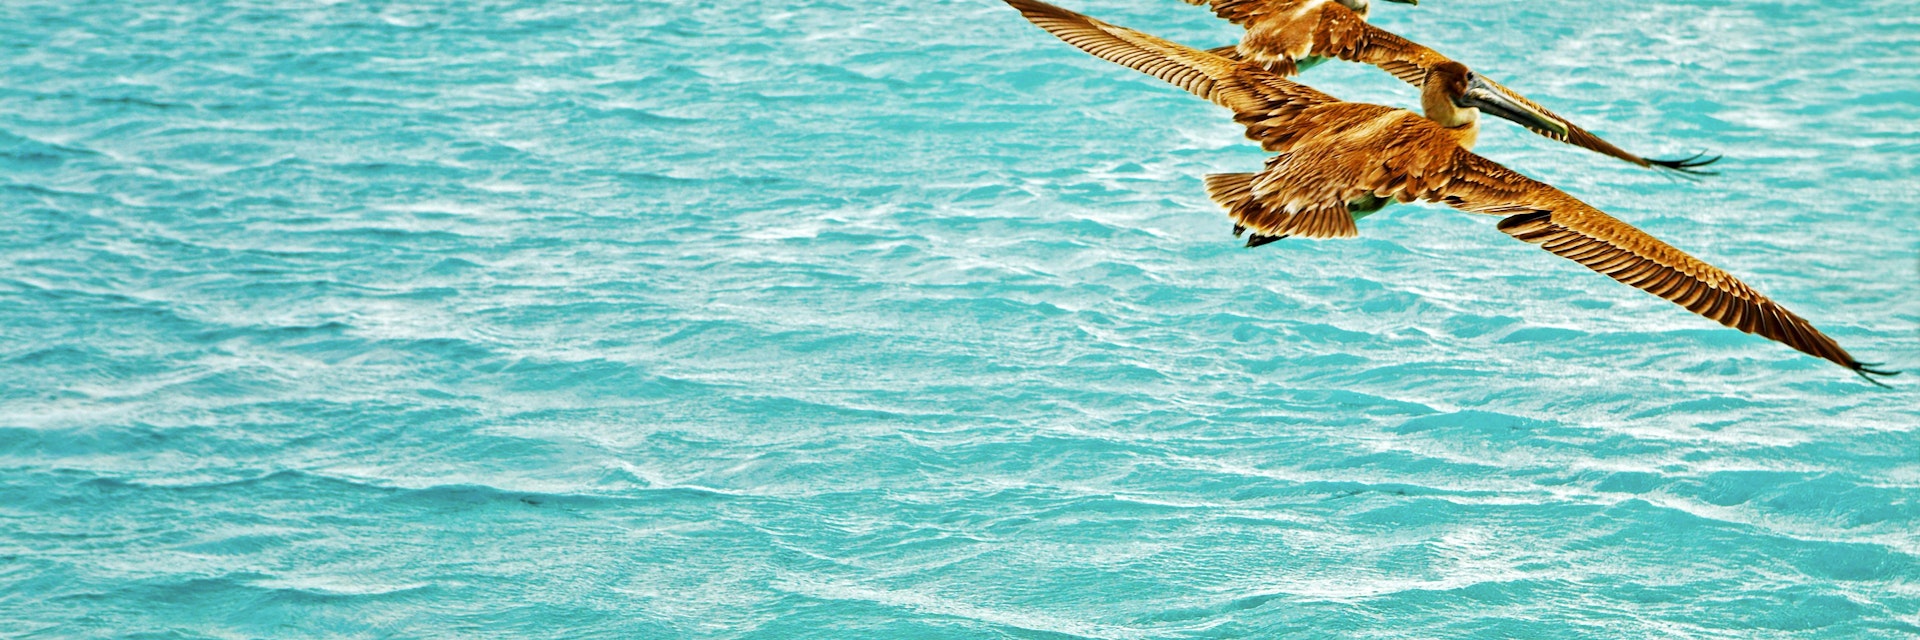 A pair of pelicans gliding over the ocean.